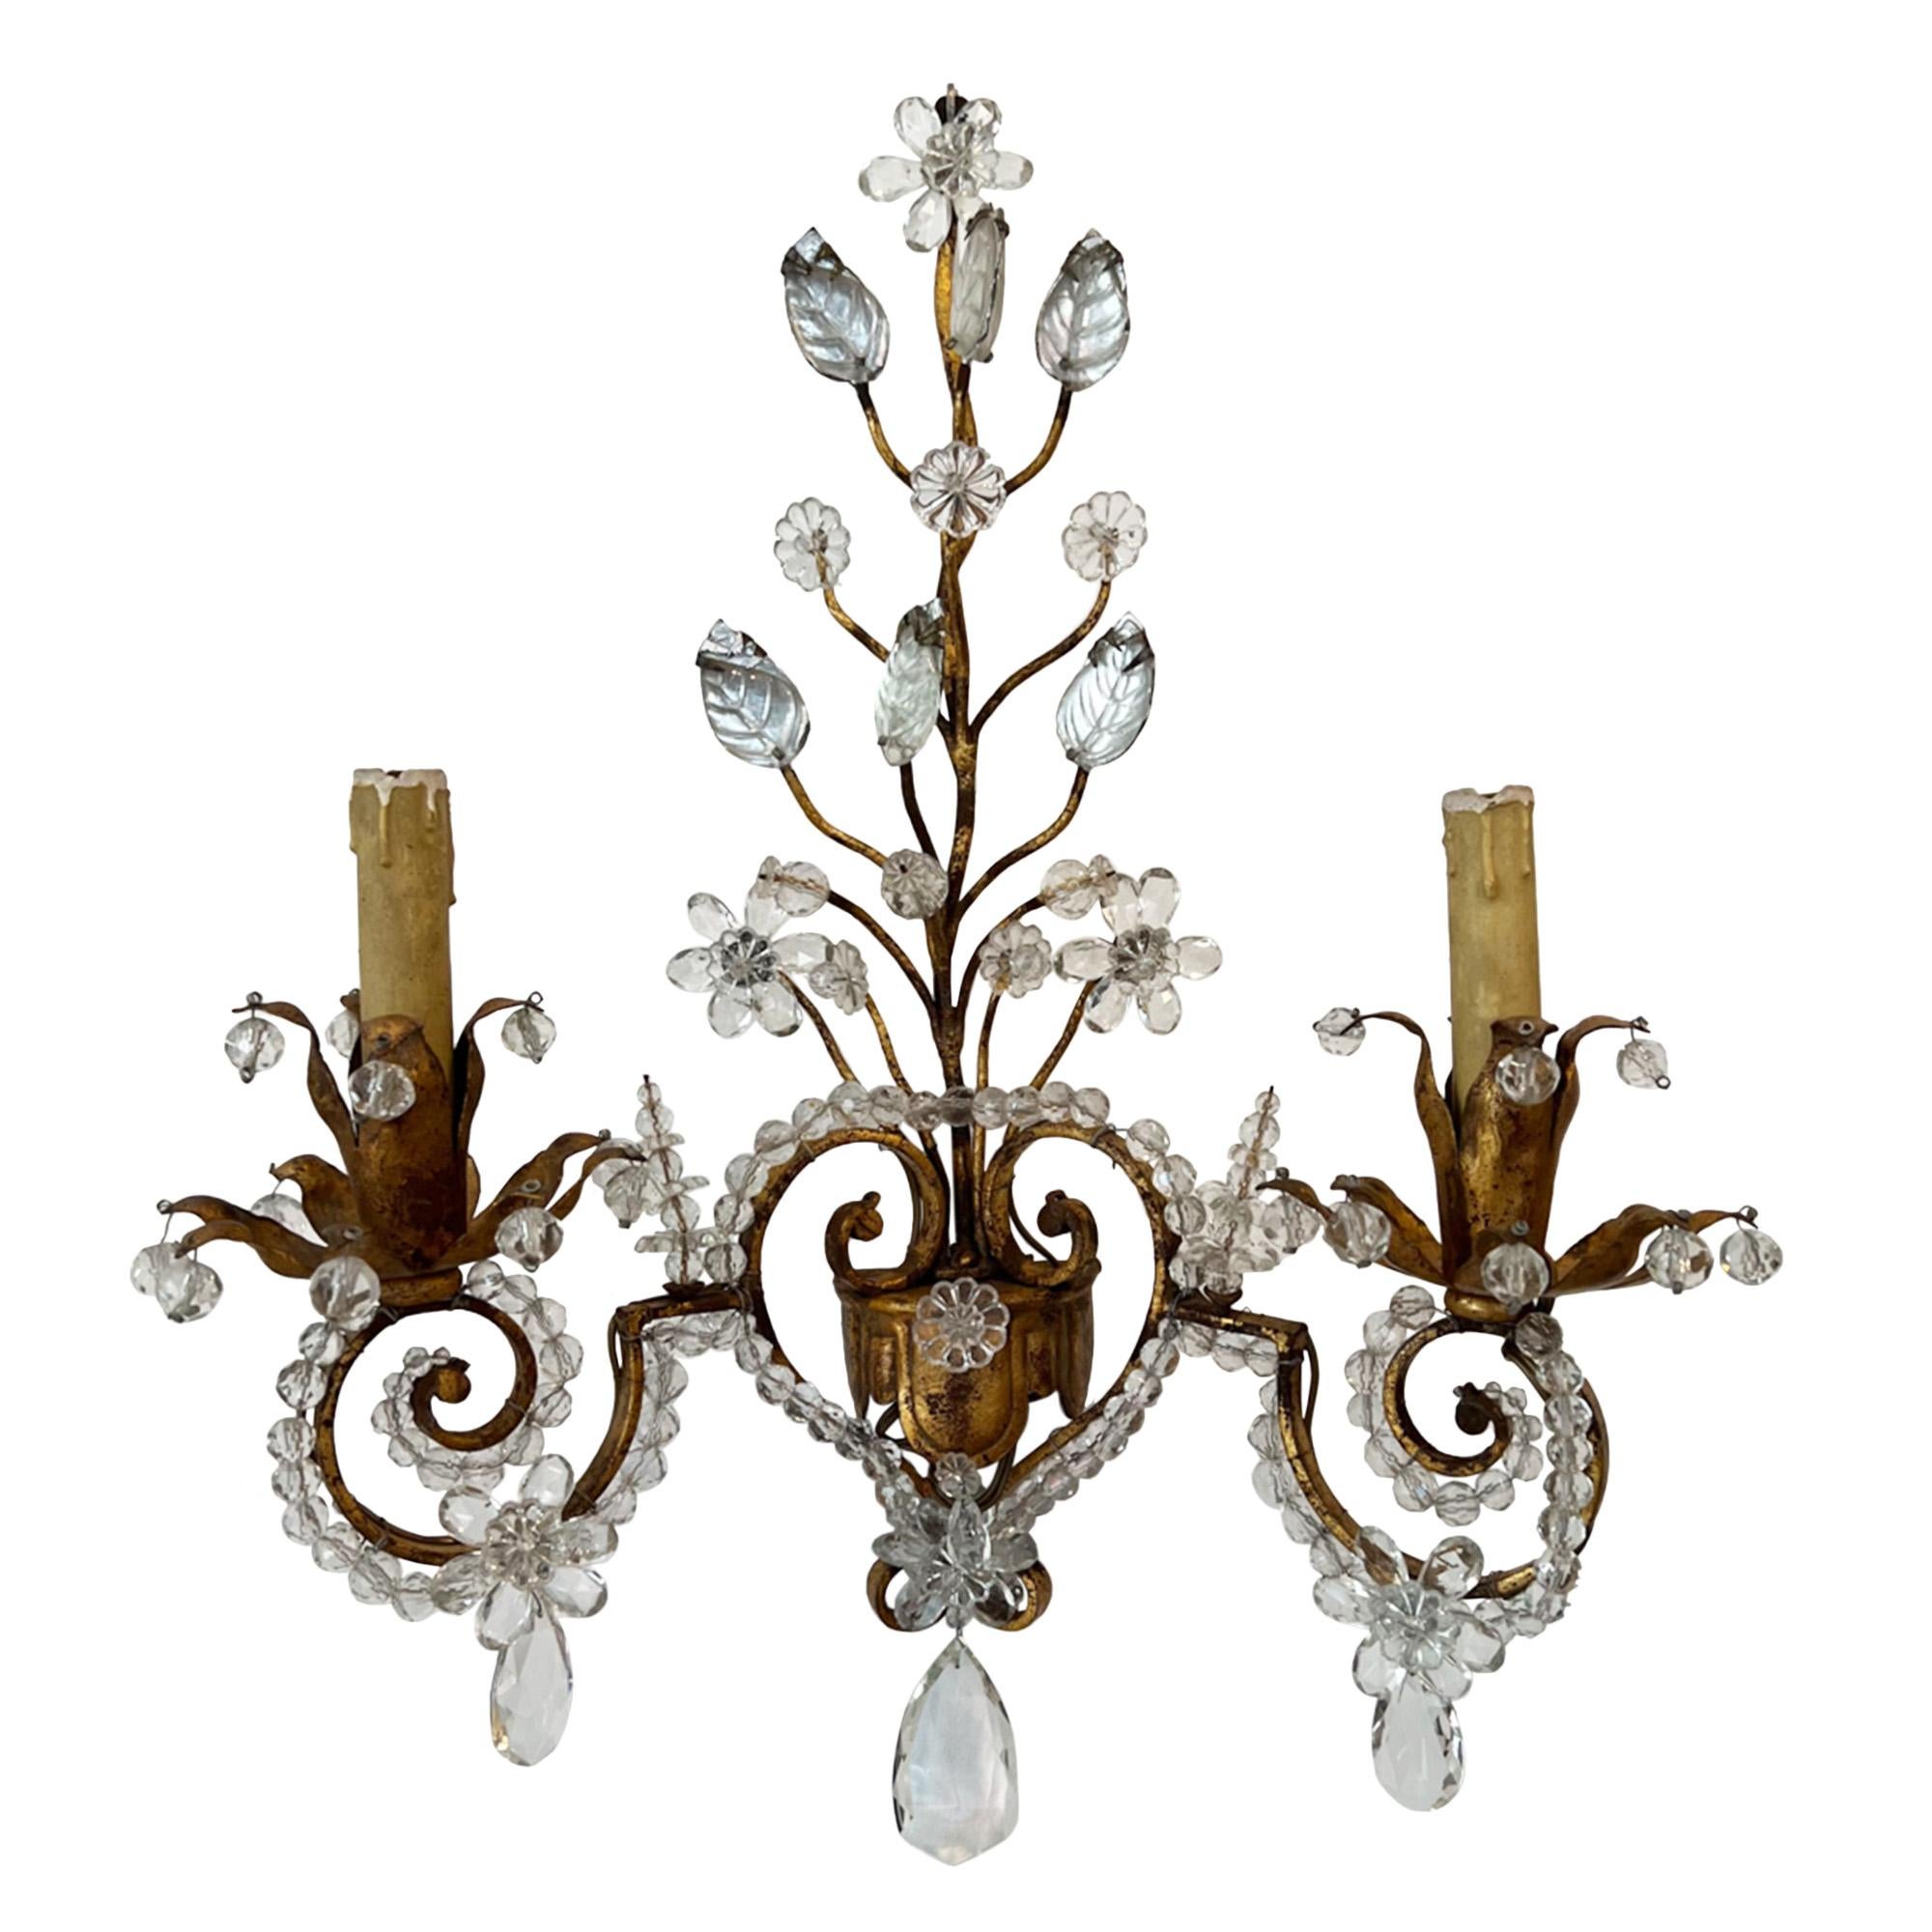 A highly decorative pair of antique wall lights, made in France in the 1950s.

Made in the manner of the lighting designer and maker Maison Baguès, these sconces are crafted from gilt metal and crystal. Lovely detail, including the heart shaped